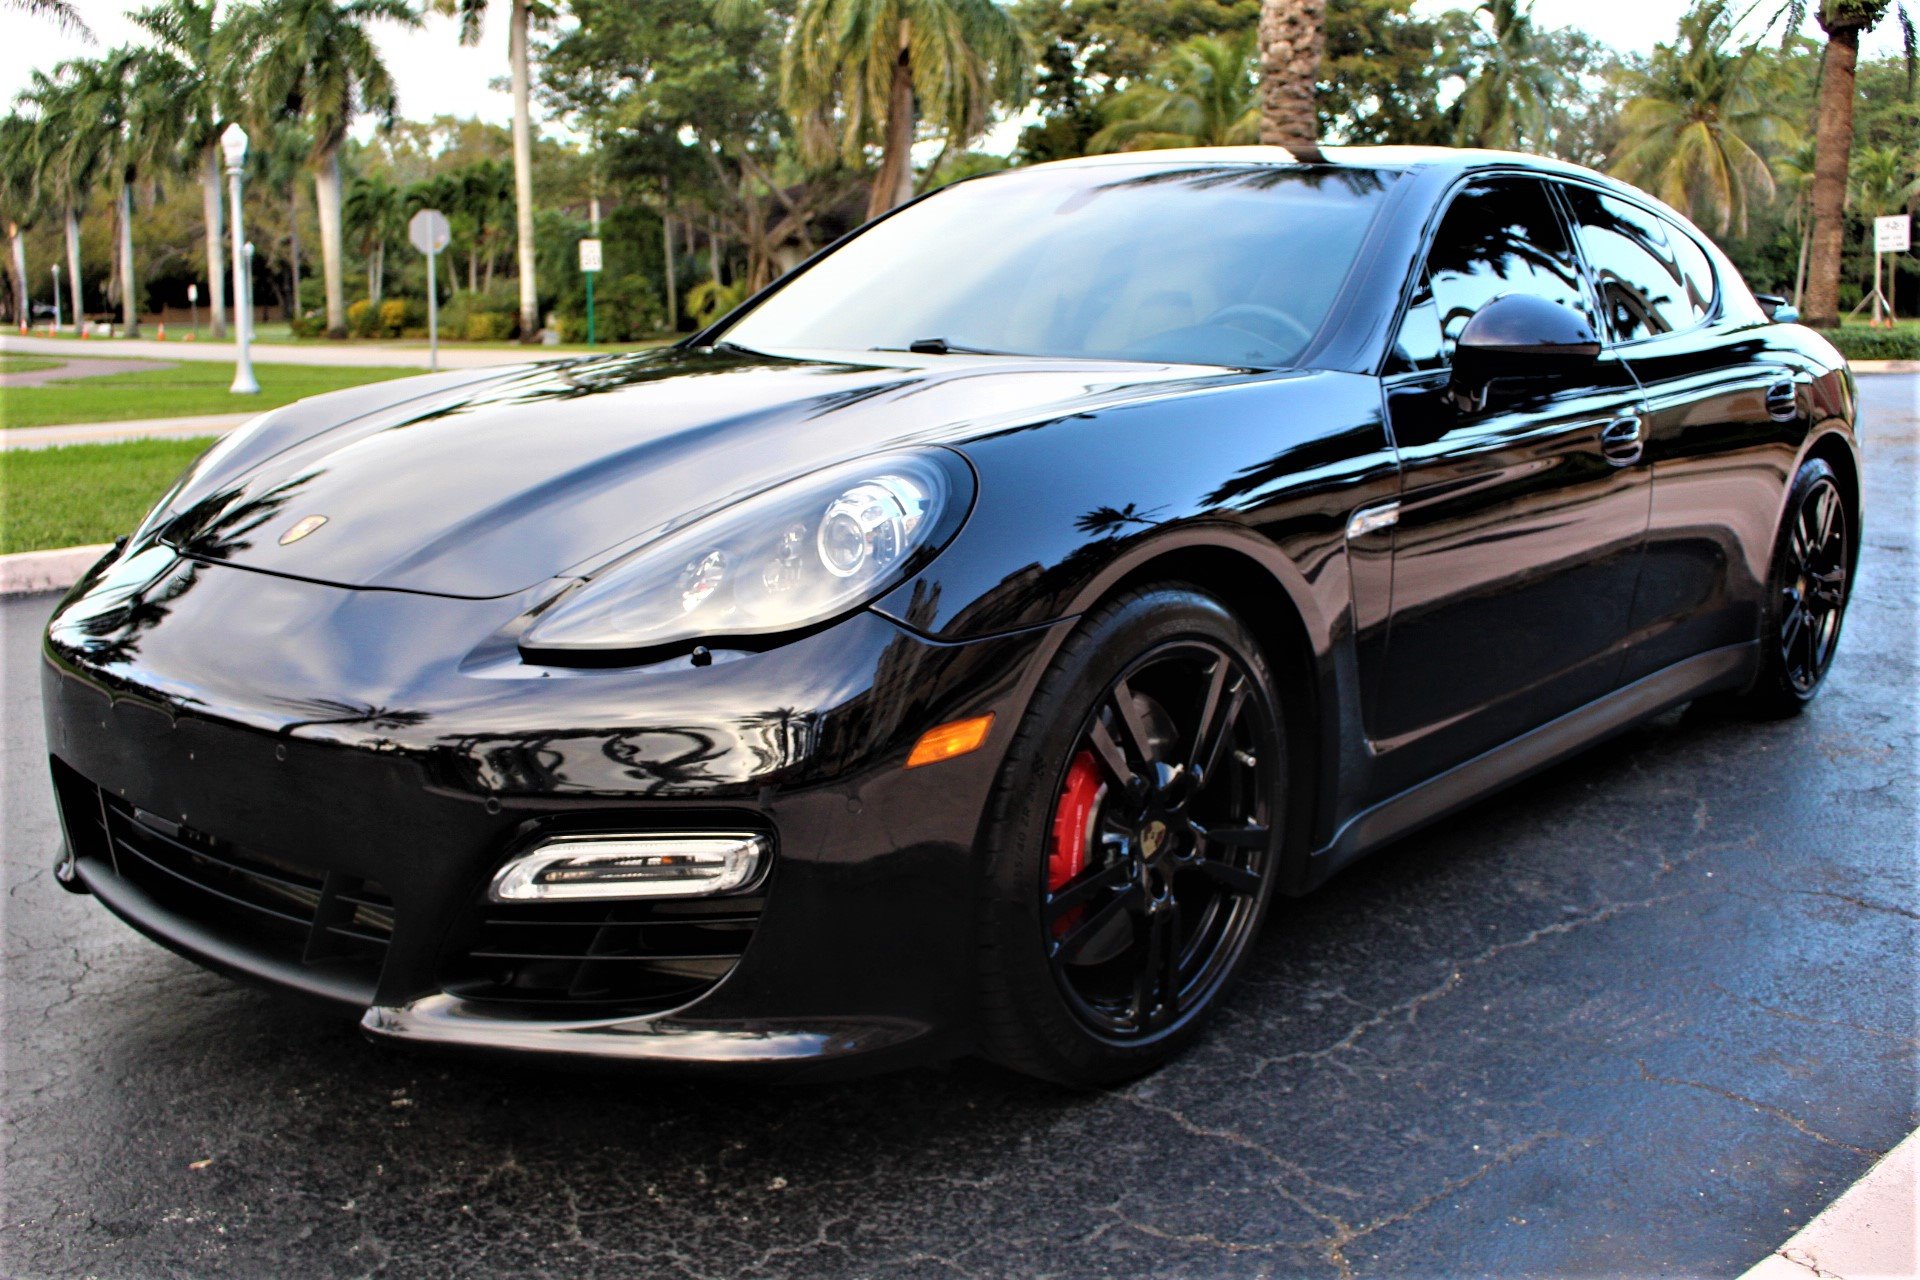 Used 2013 Porsche Panamera GTS for sale Sold at The Gables Sports Cars in Miami FL 33146 4